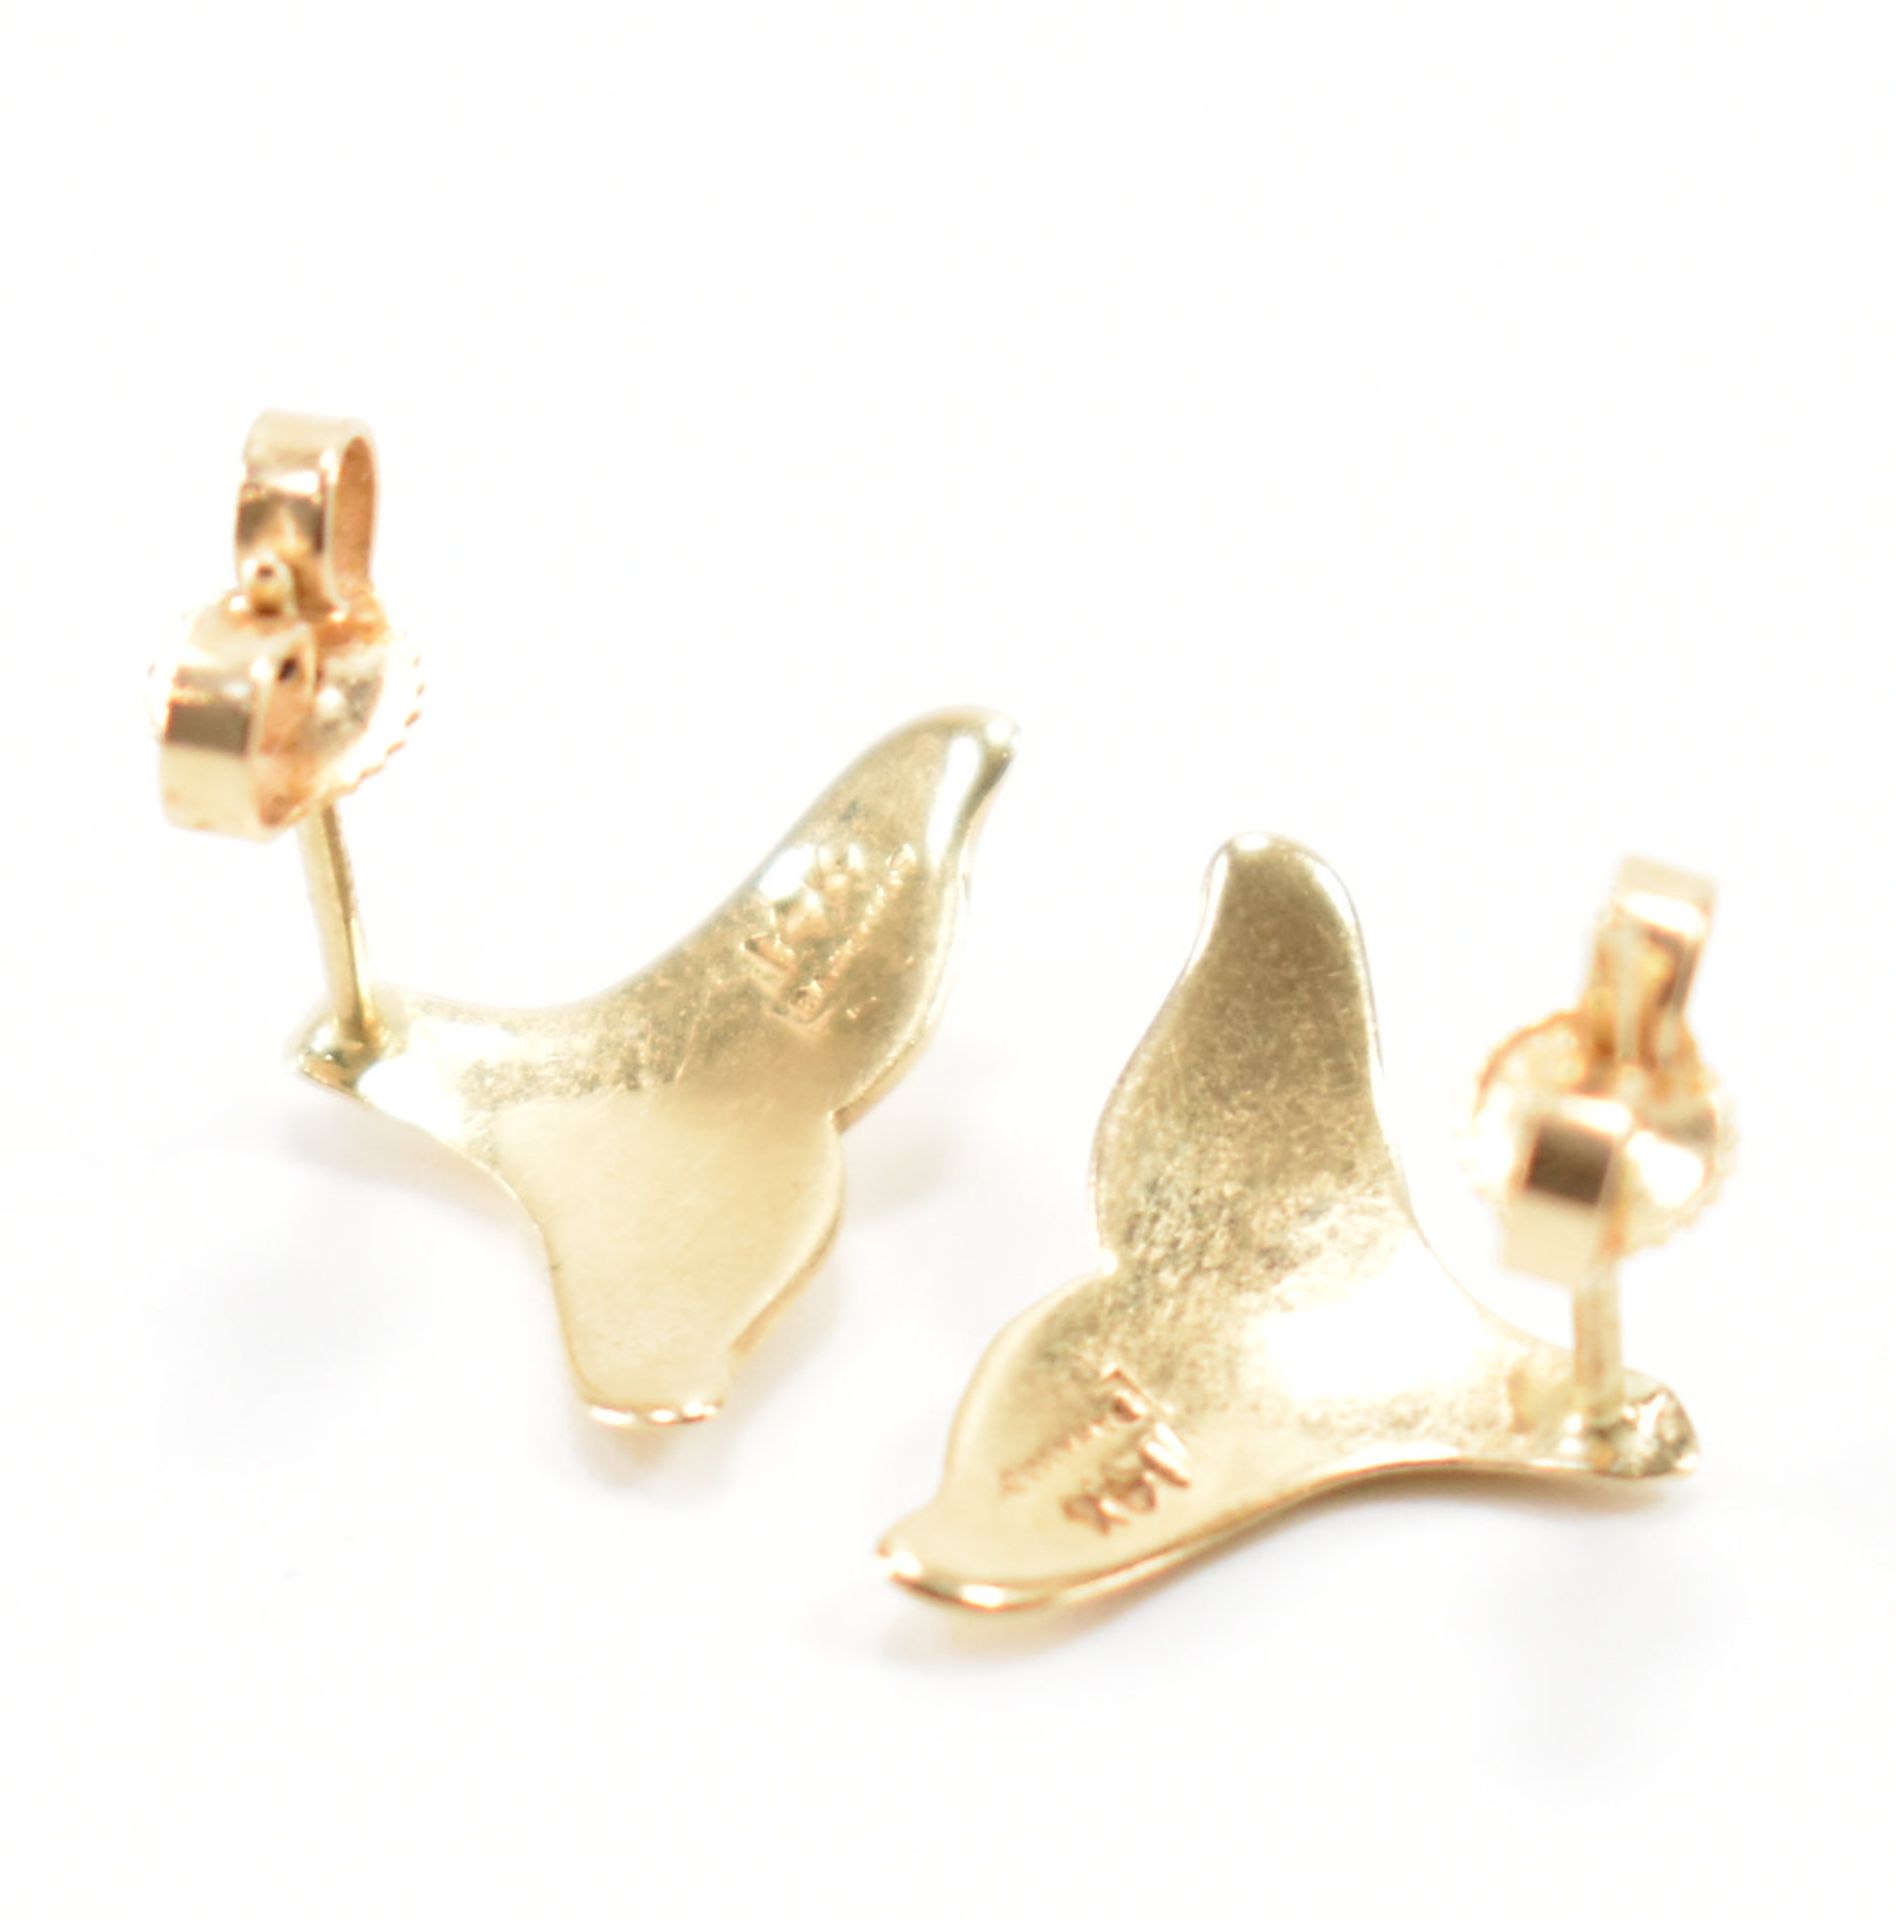 PAIR OF GOLD WHALE TAIL STUD EARRINGS - Bild 3 aus 4